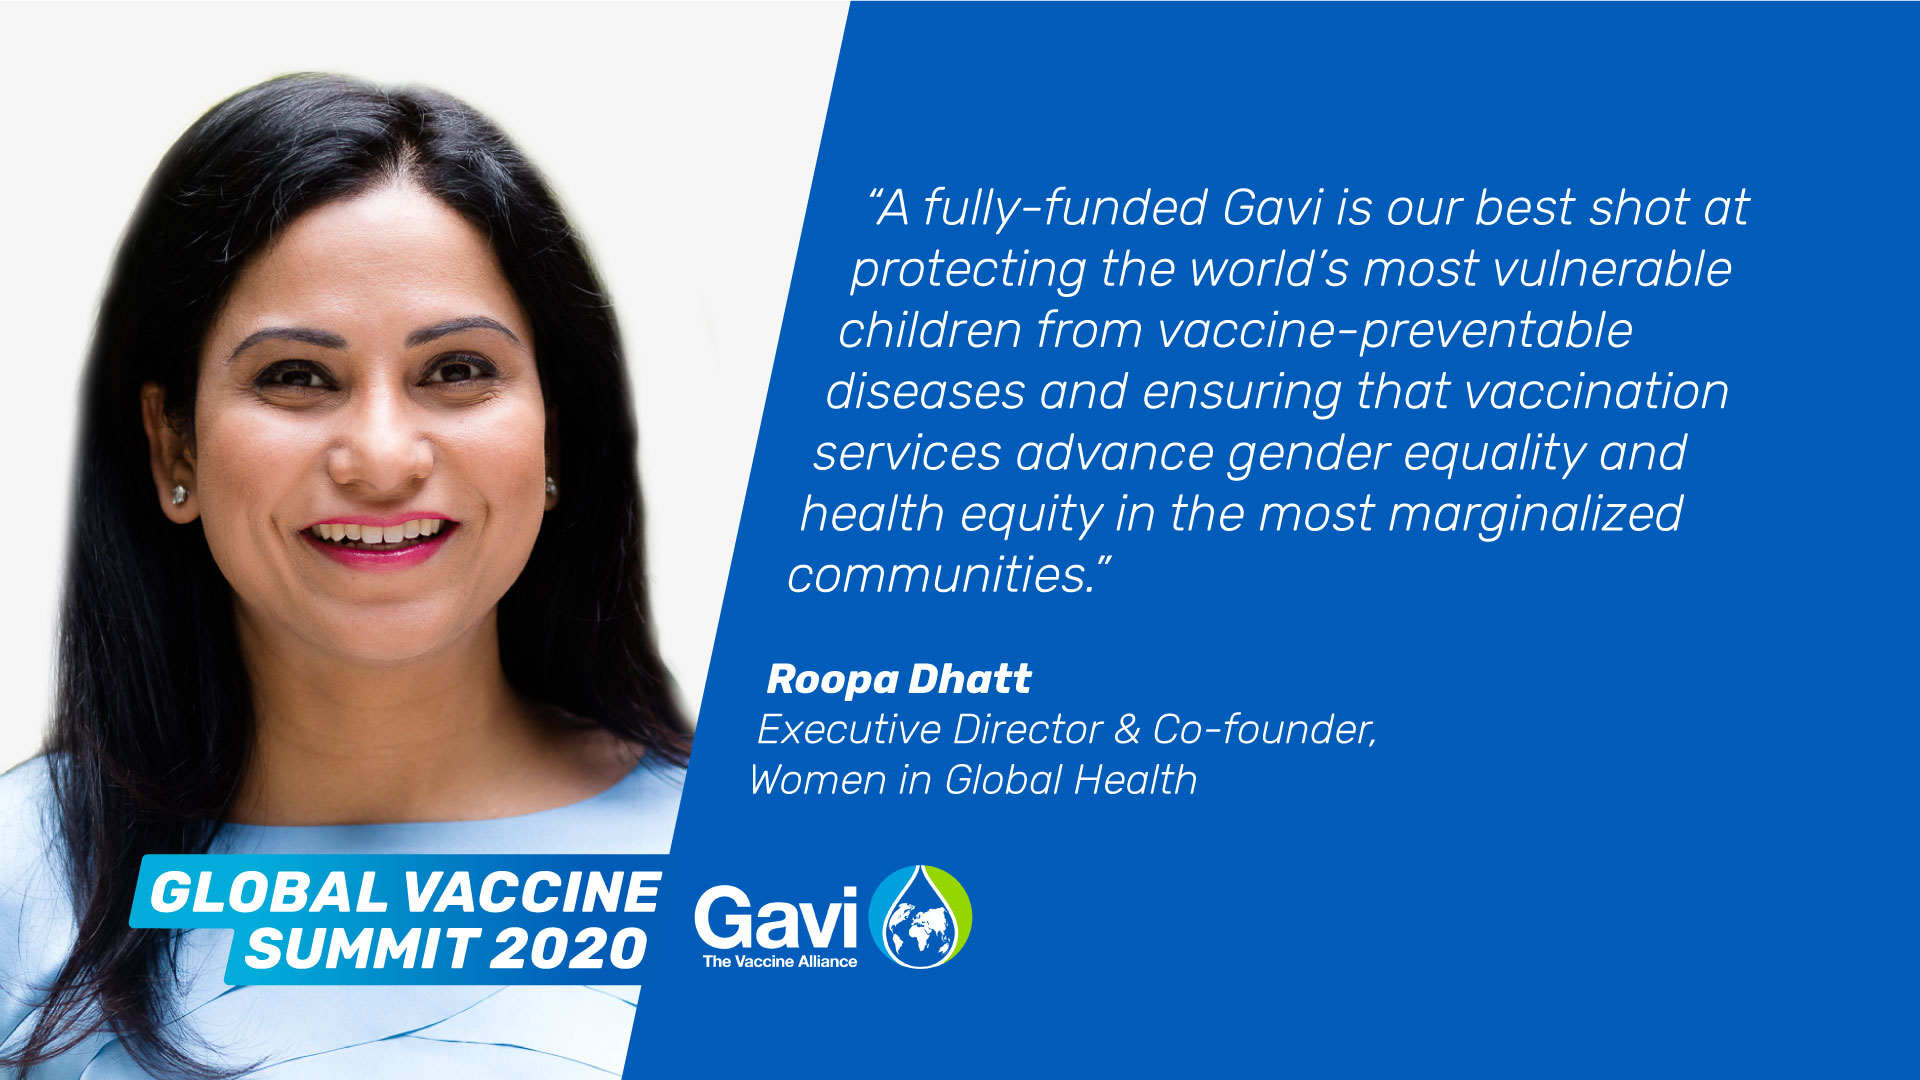 Roopa Dhatt, Executive Director & Co-founder, Women in Global Health